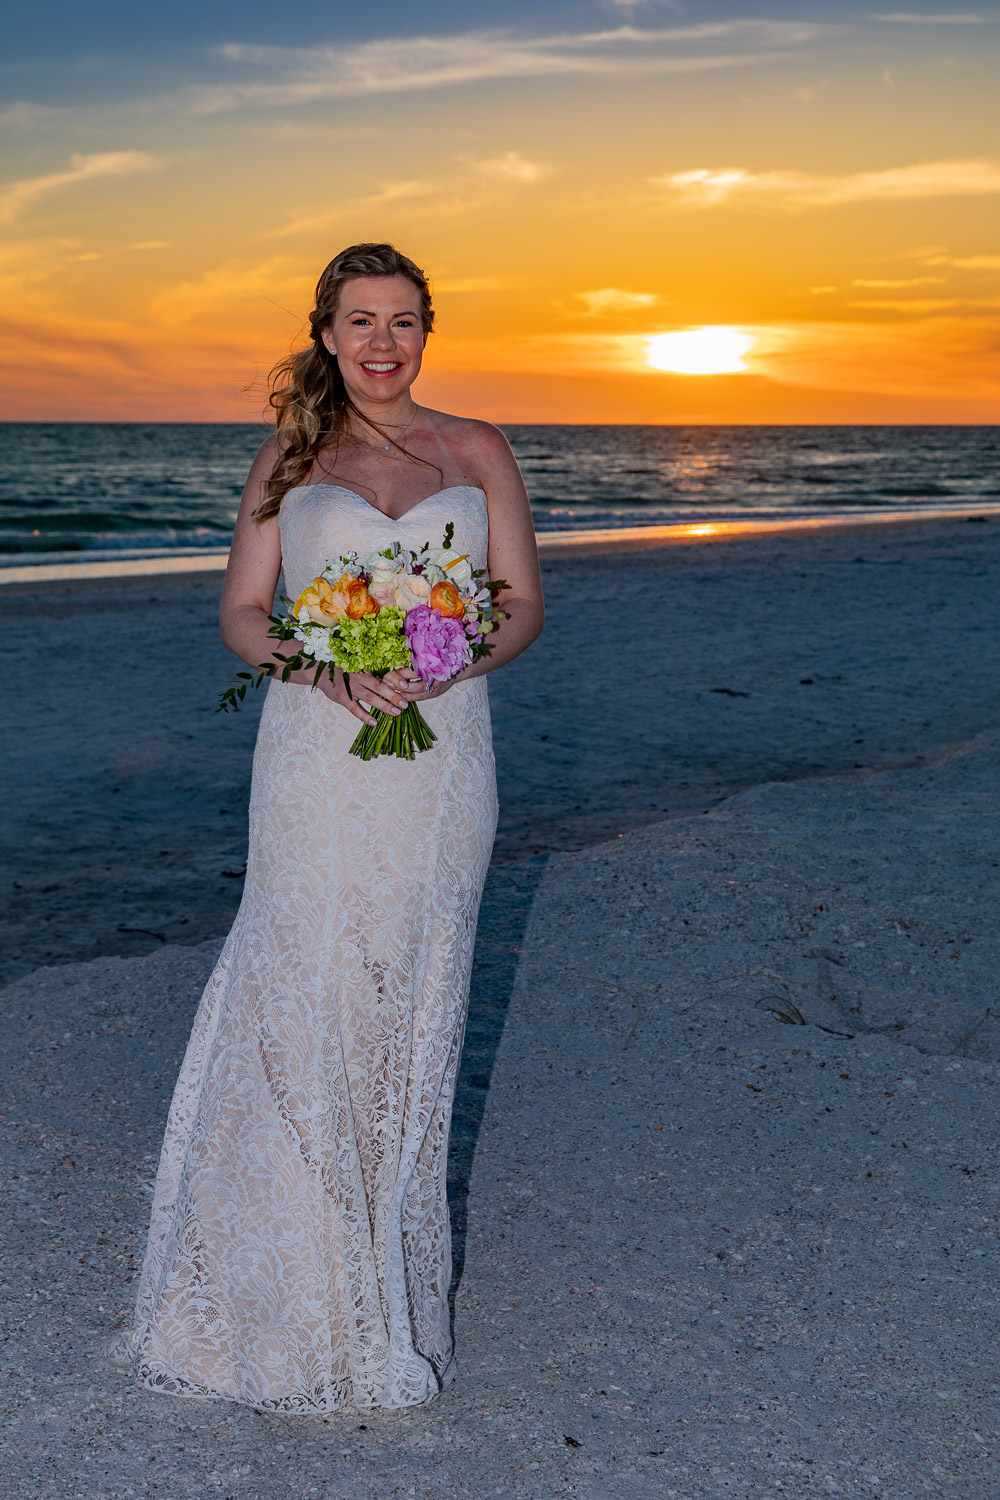   Steve McCarthy Photography: Premier SWFL Wedding Photographer serving all of SWFL,  from Tampa to Naples, Fort Myers Beach, Pine Island, Sanibel, Captiva and Marco Island and over to Miami and up to Delray Beach, including: Tampa, Sarasota, Venice,